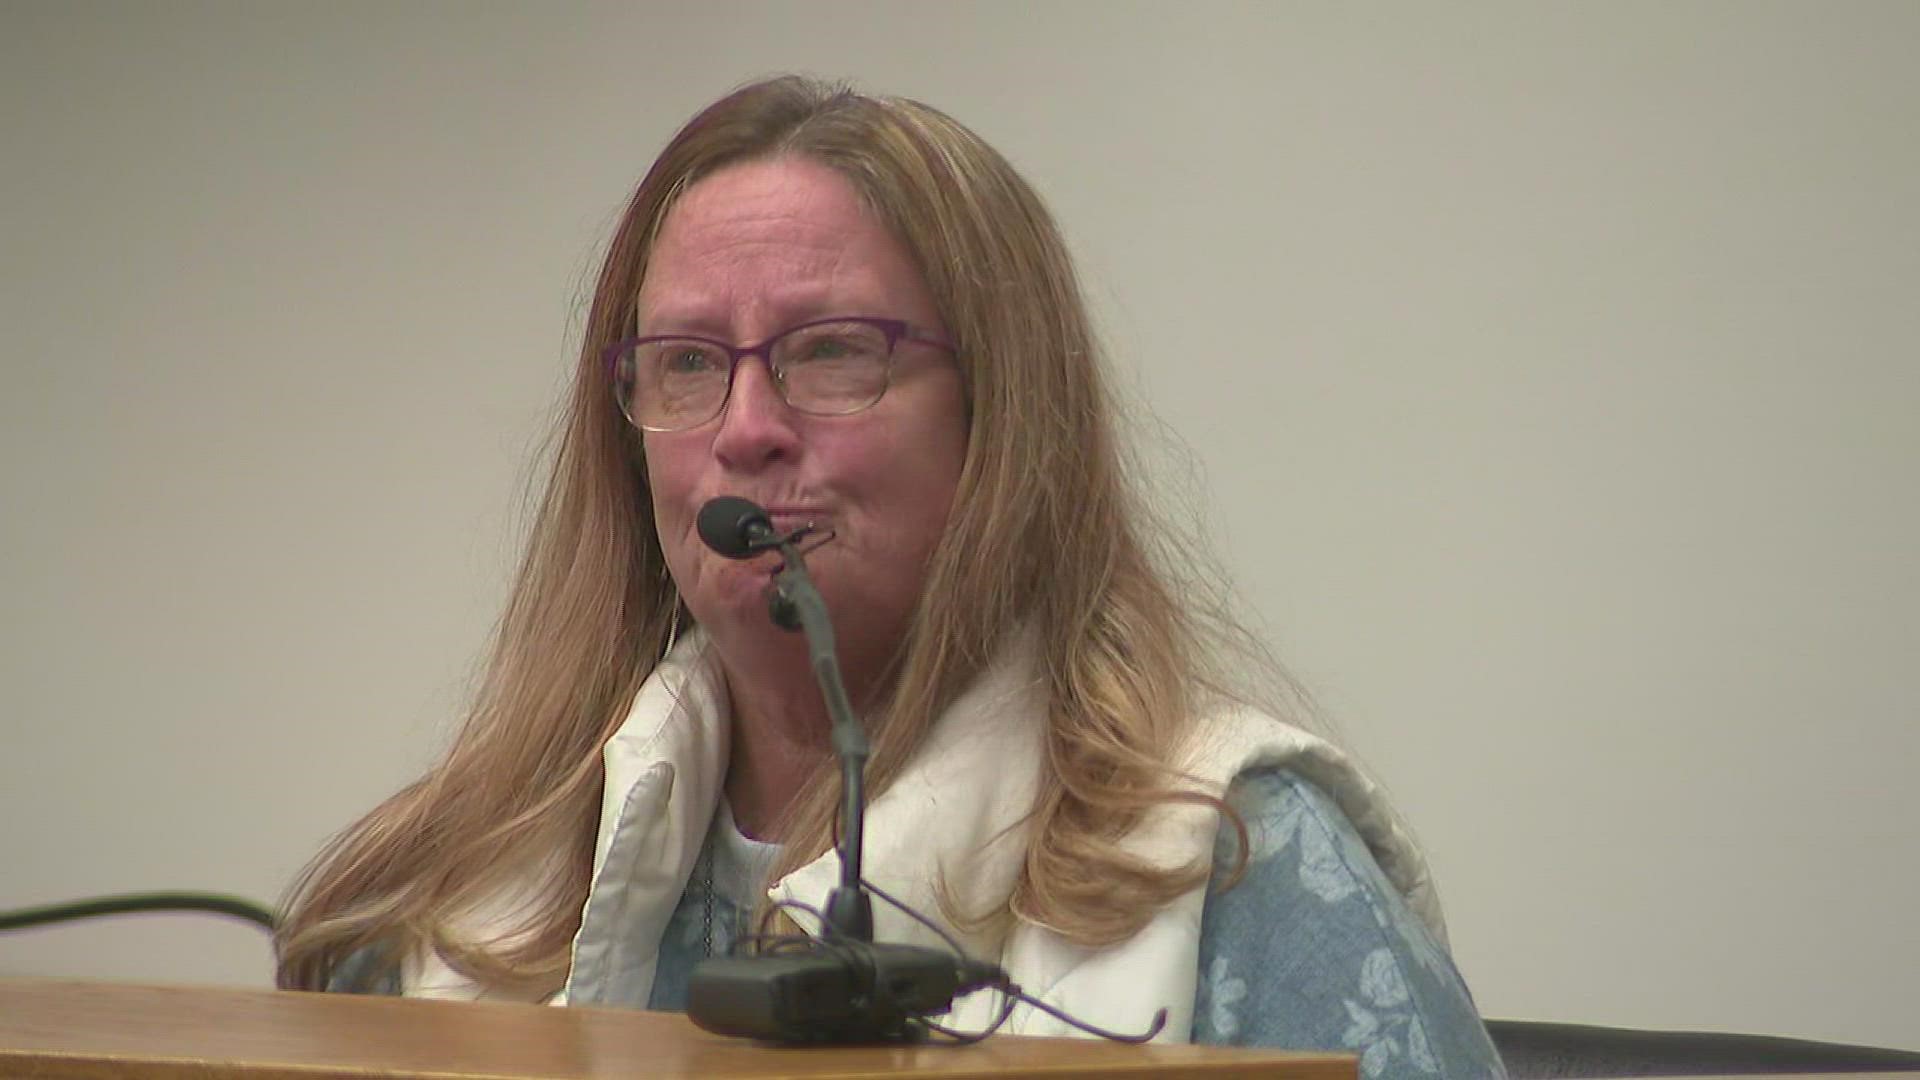 The school shooter's aunt testifies at the sentencing hearing for the defendant in the 2018 Dixon High School shooting.